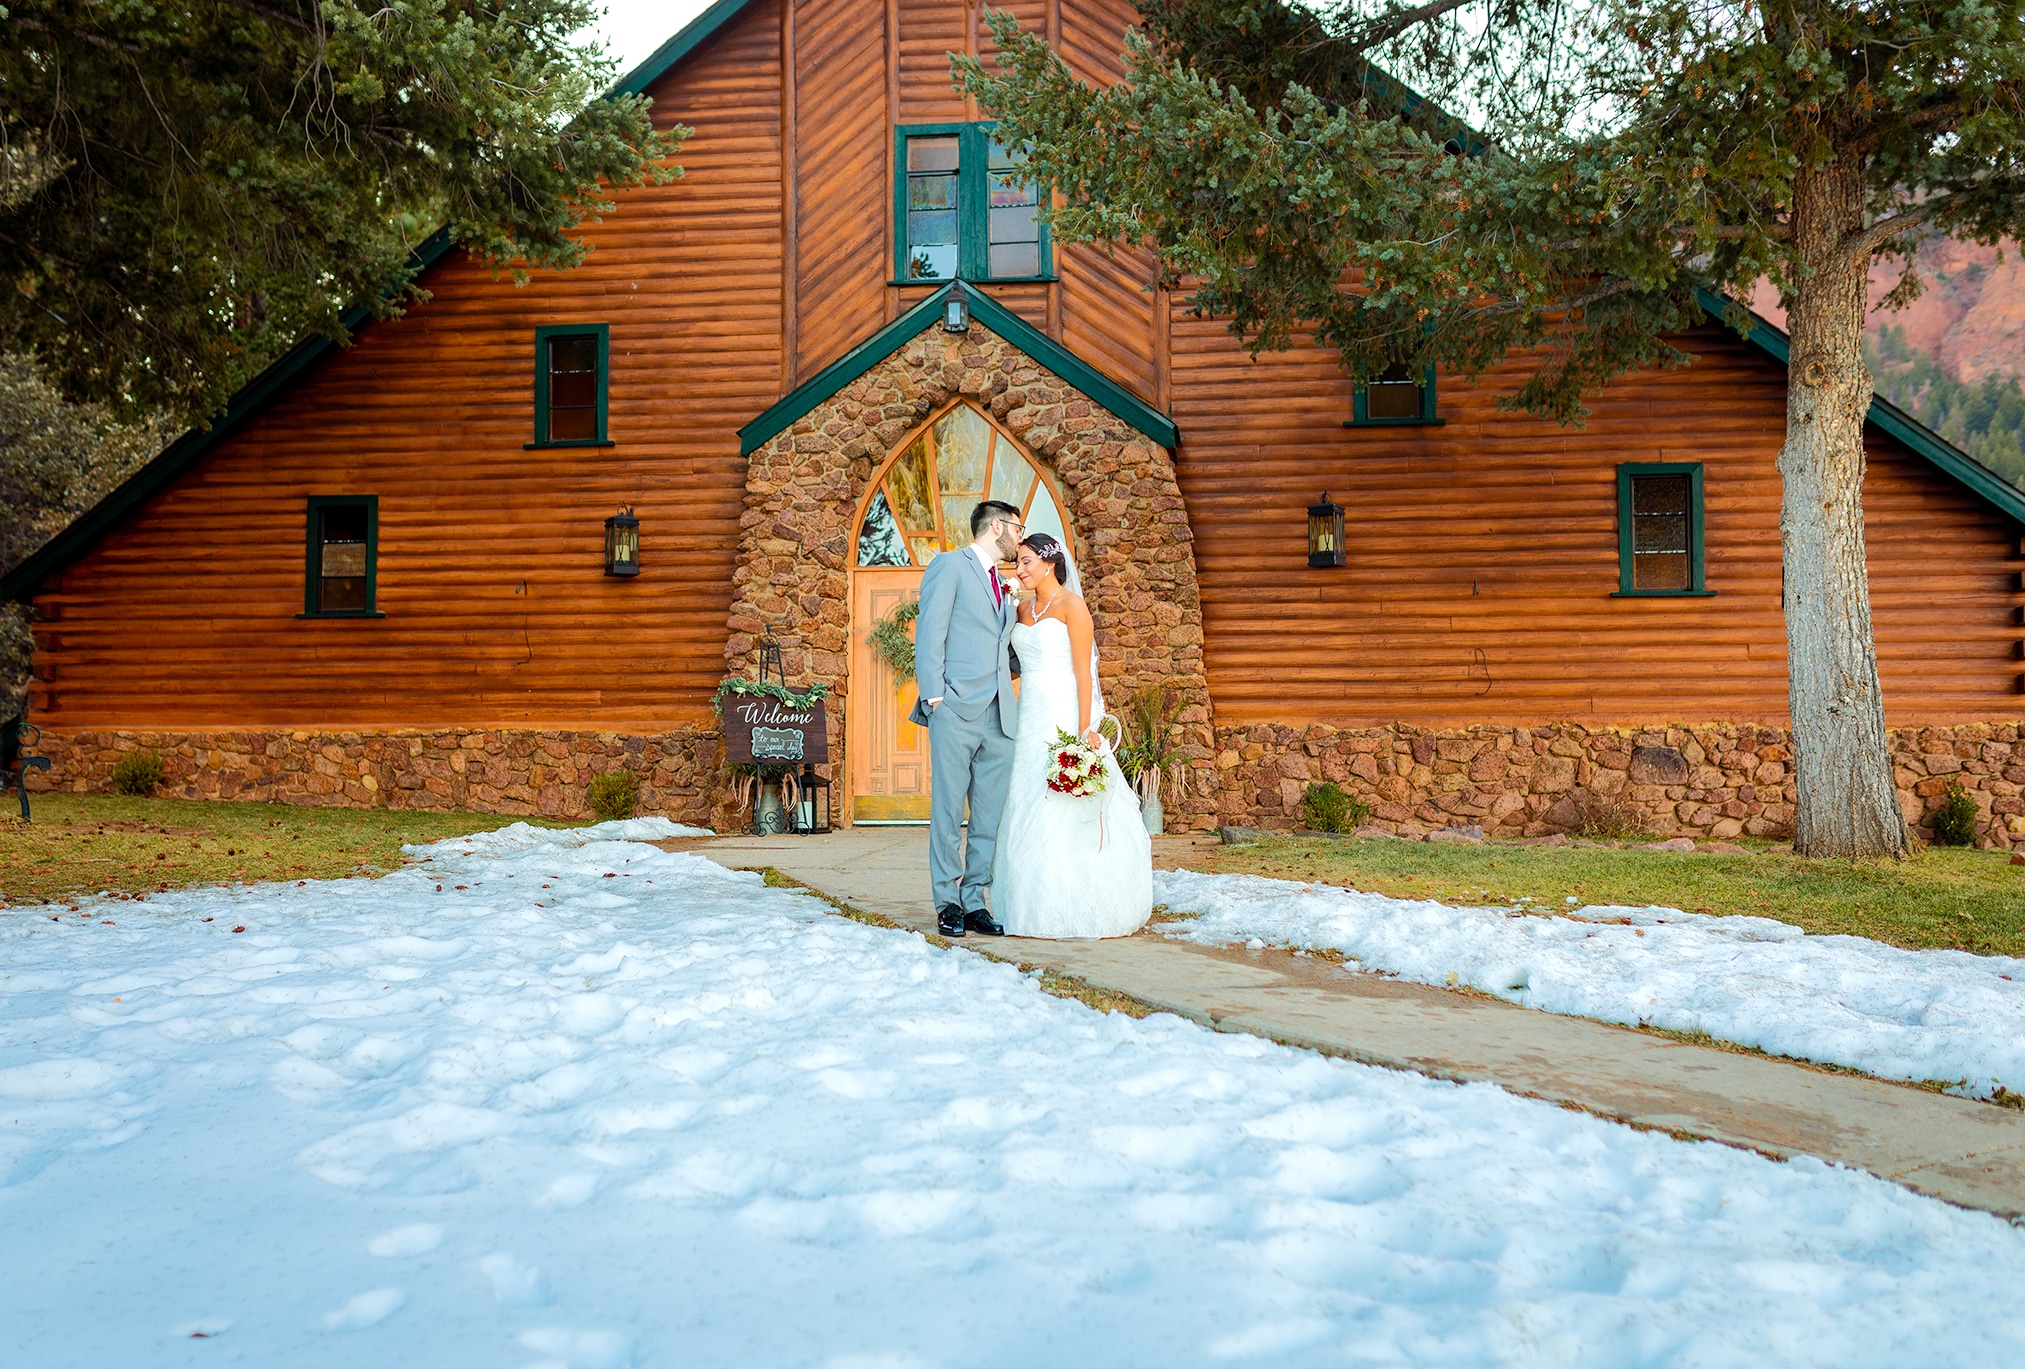 Best Rustic Wedding Venues Colorado of the decade Don t miss out 